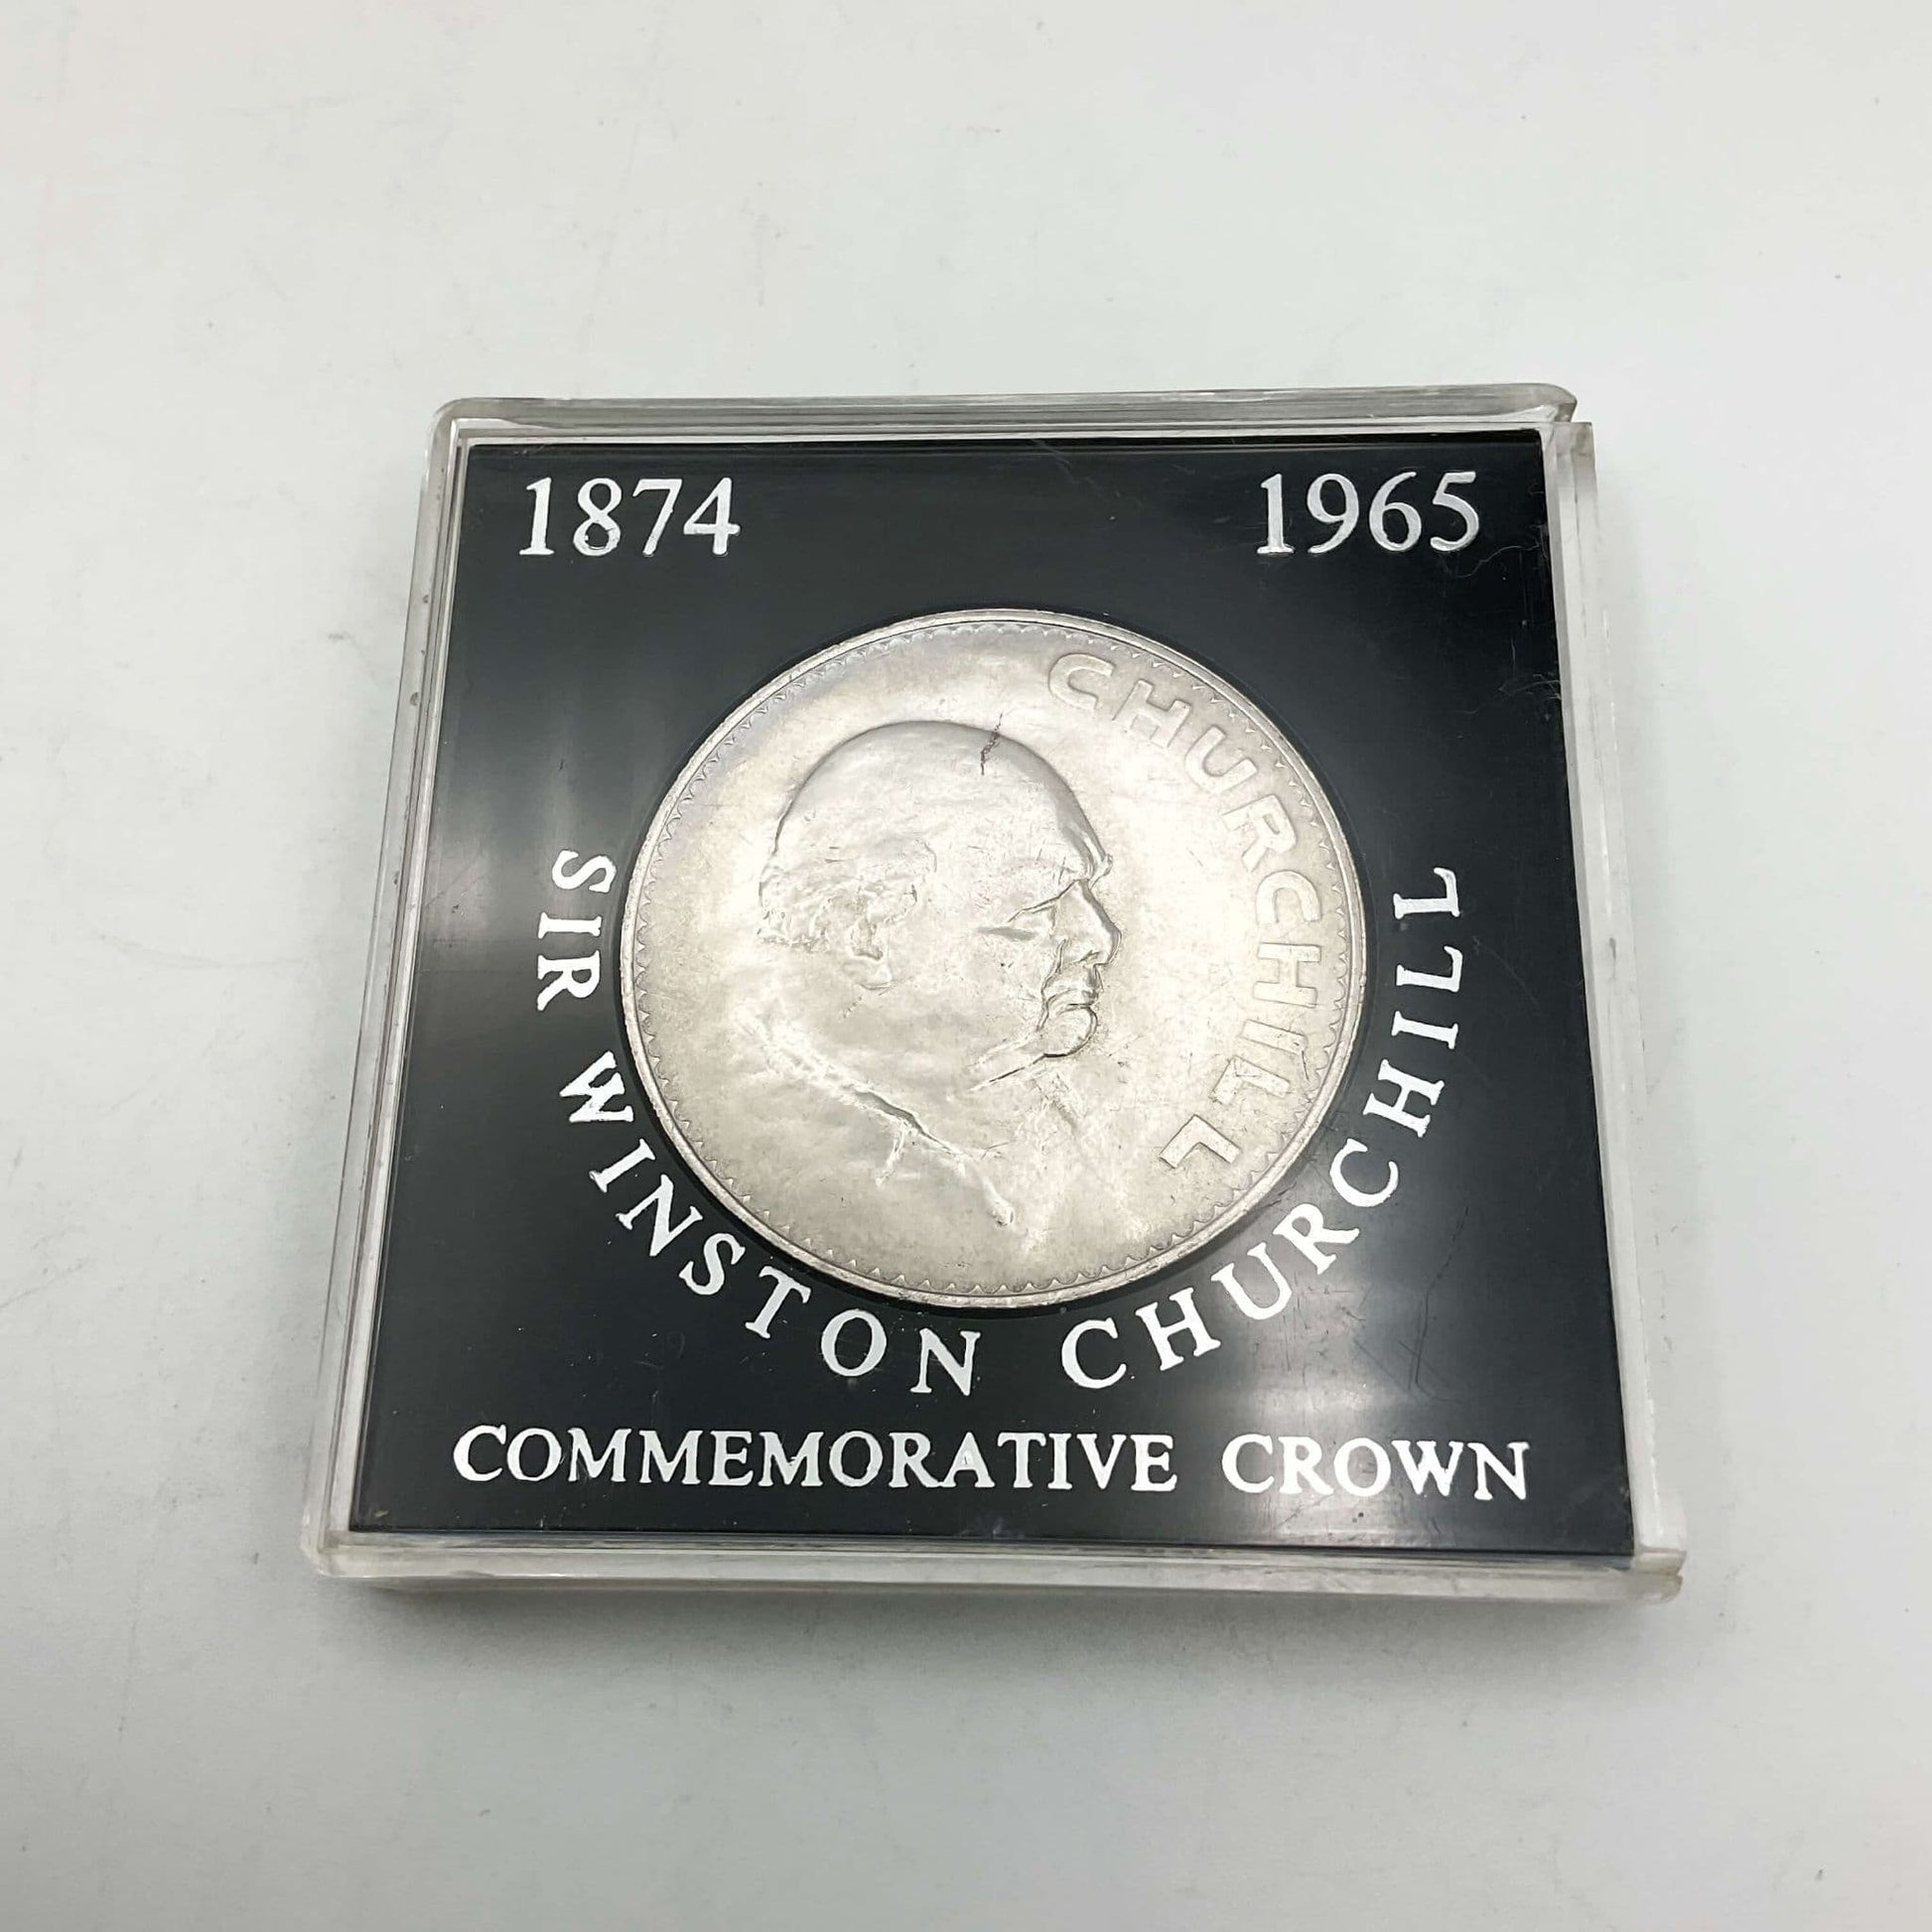 Silver coloured Winston Churchill coin with his head on a coin in a black framed case